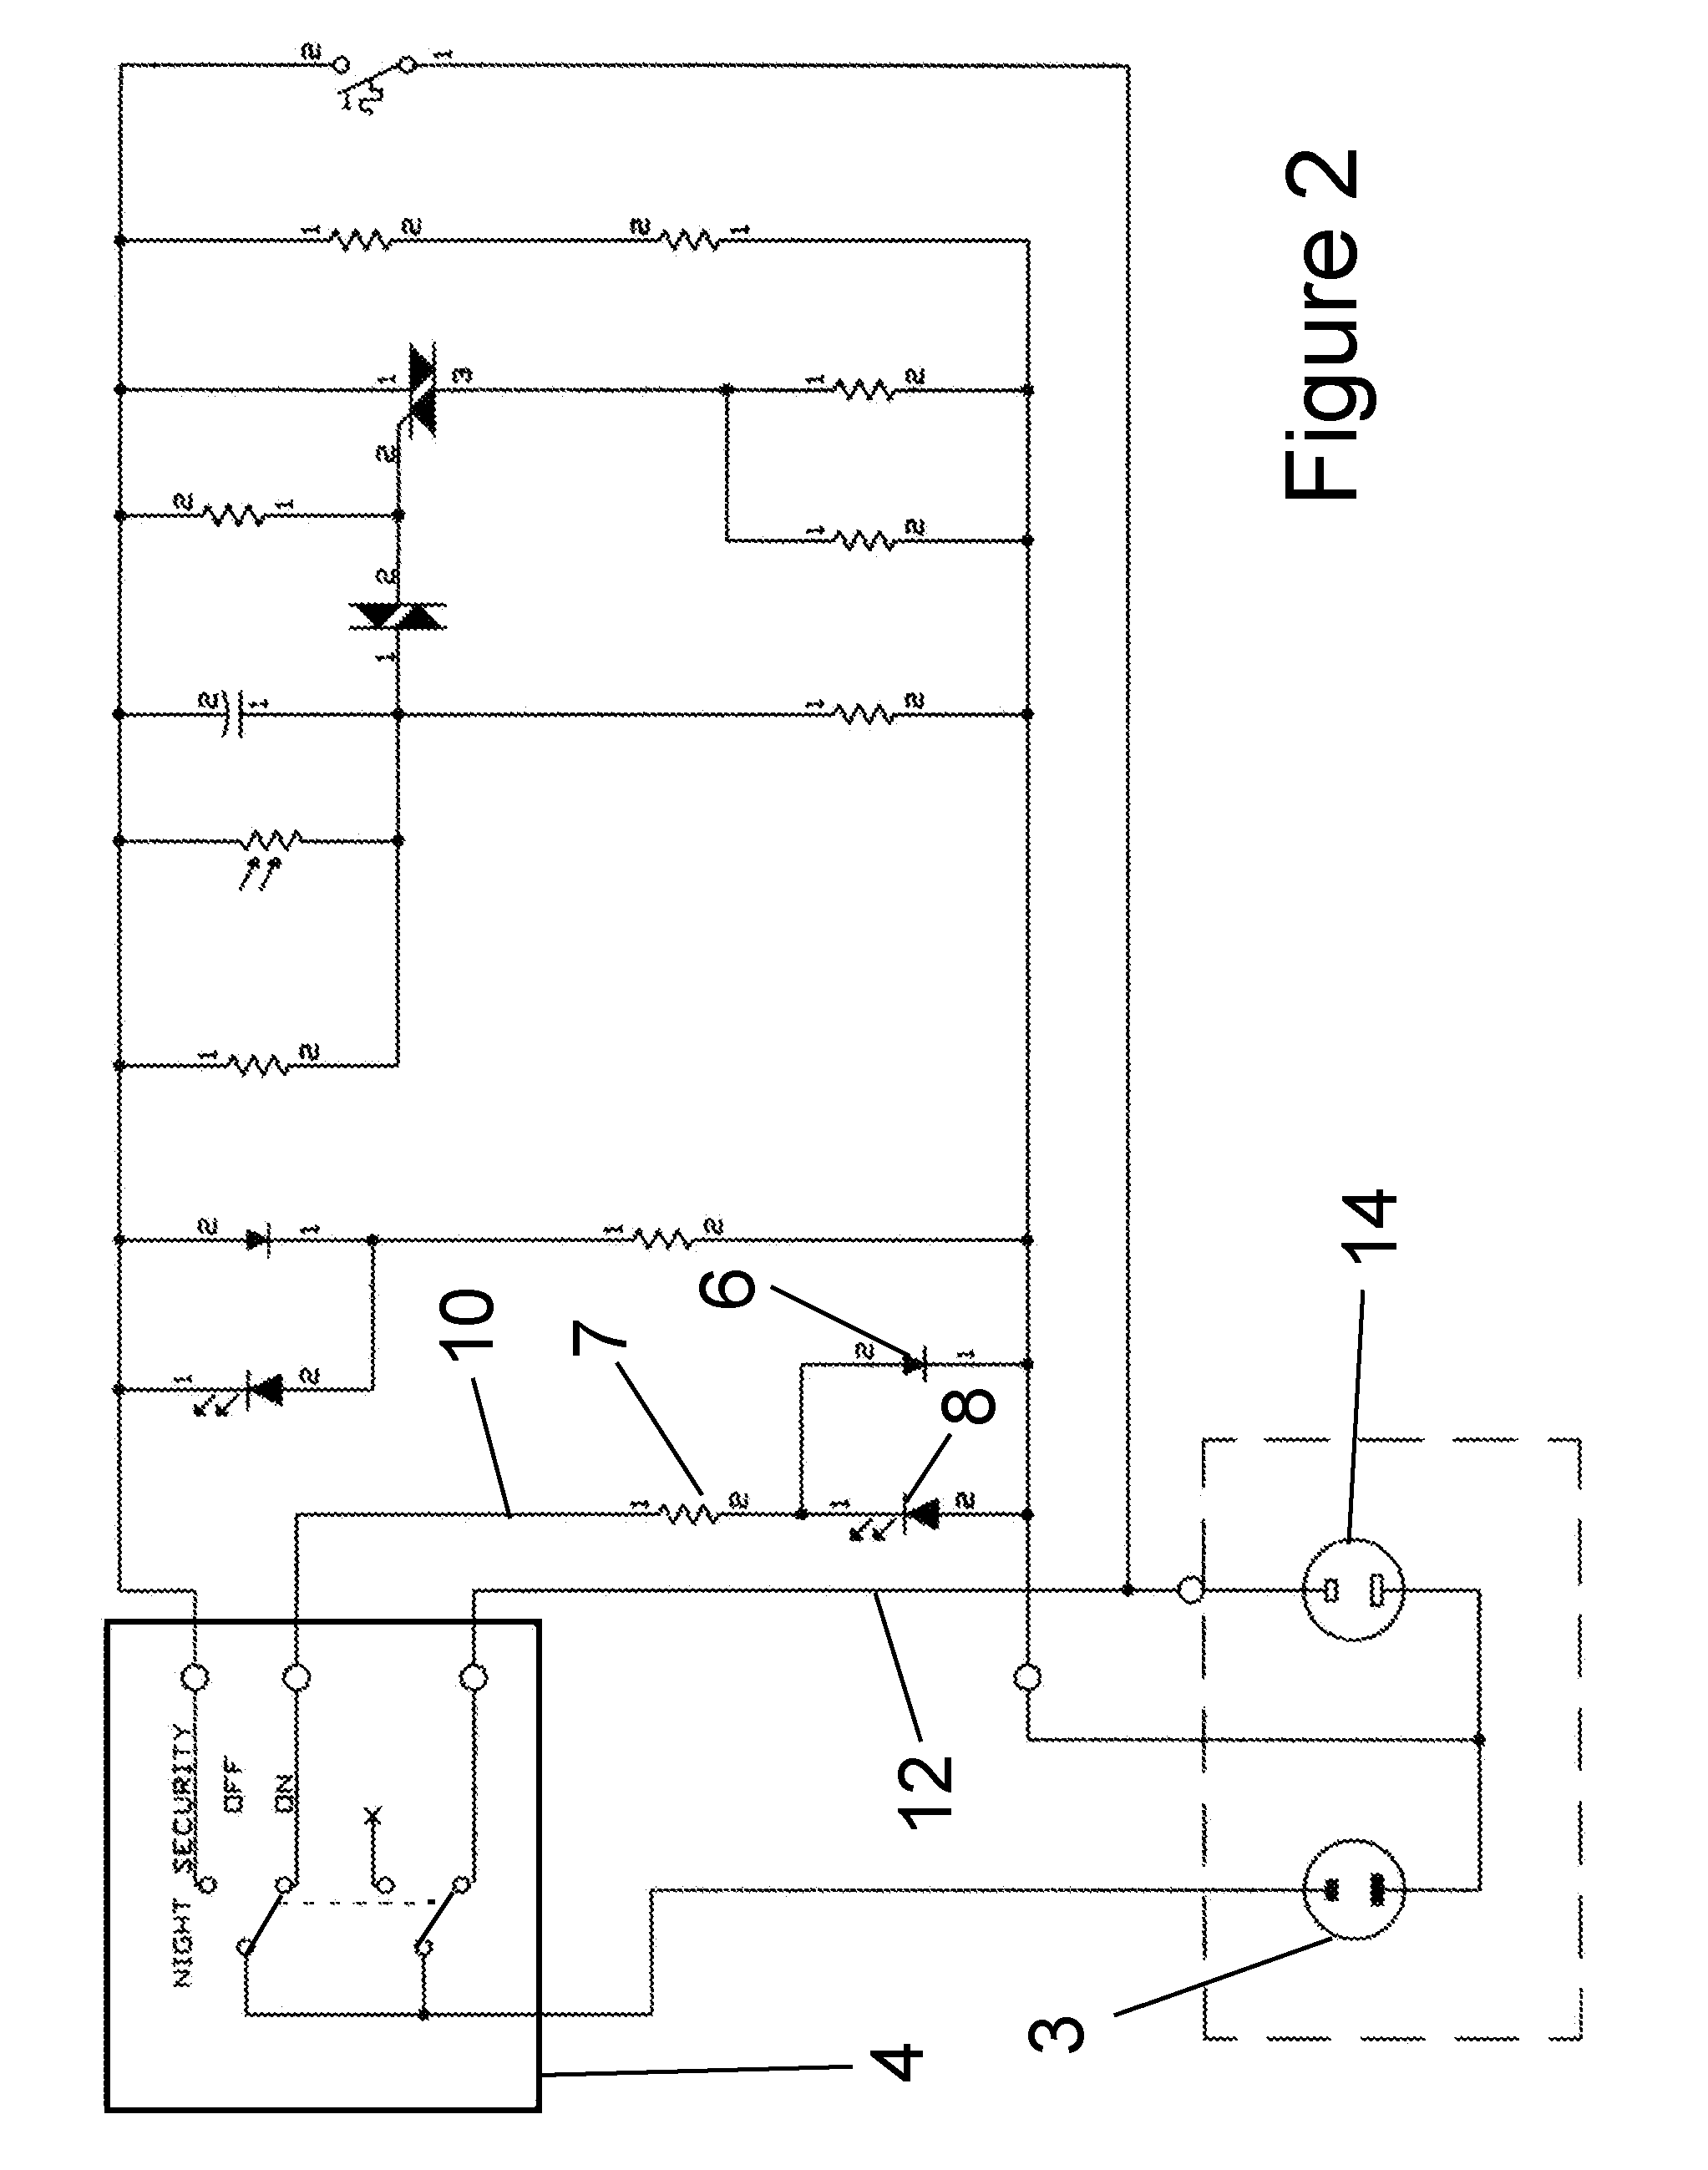 Device for Simulating Human Activity in an Unoccupied Dwelling